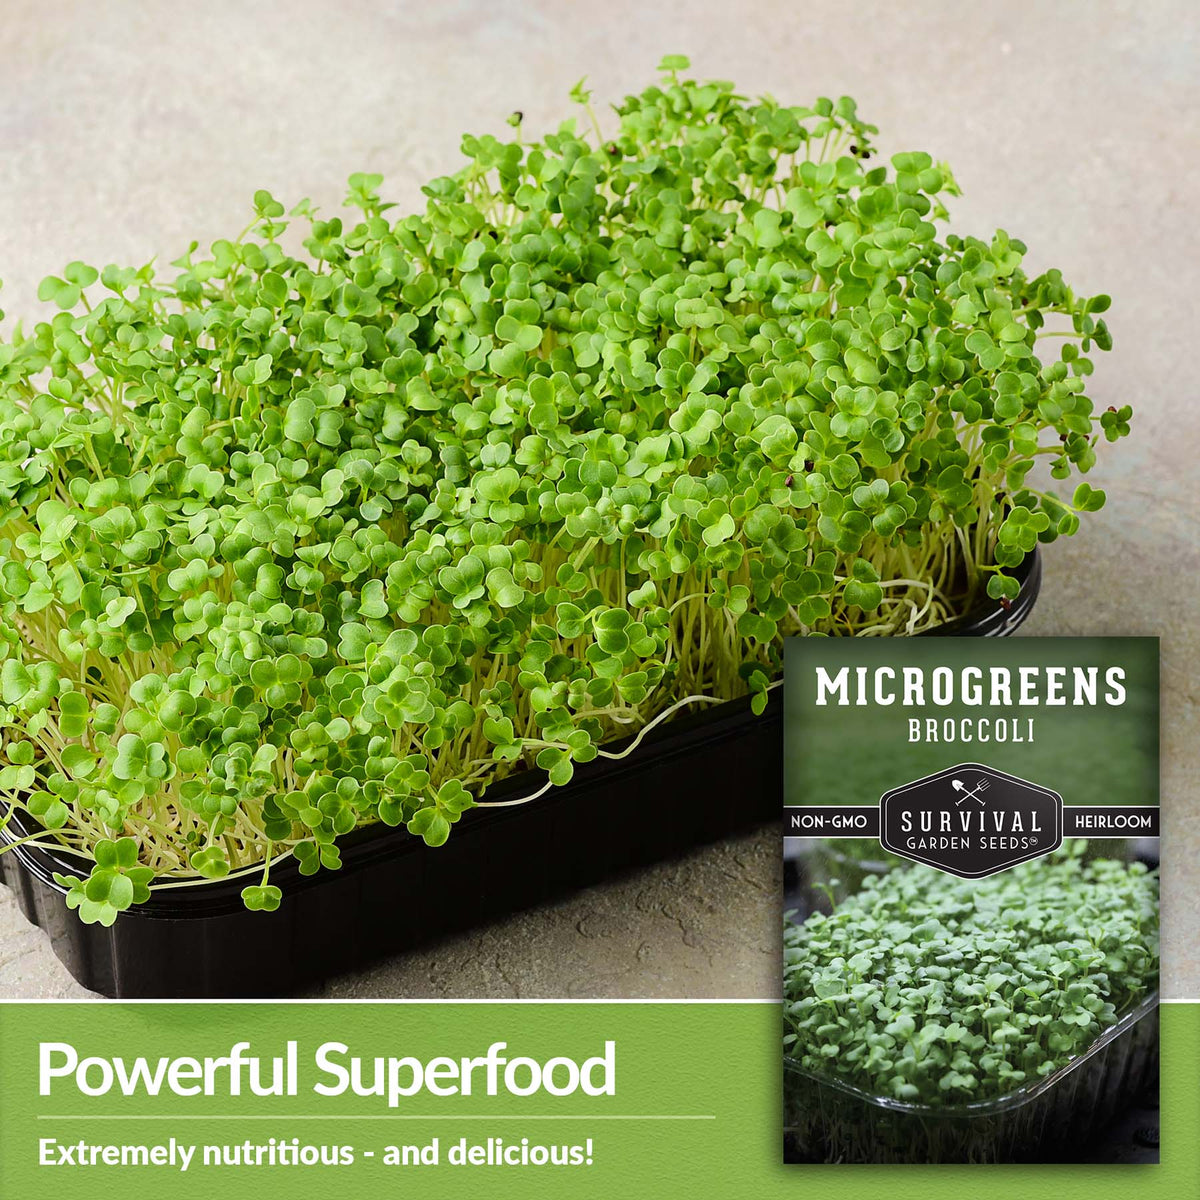 Microgreens are a nutritious and delicious superfood